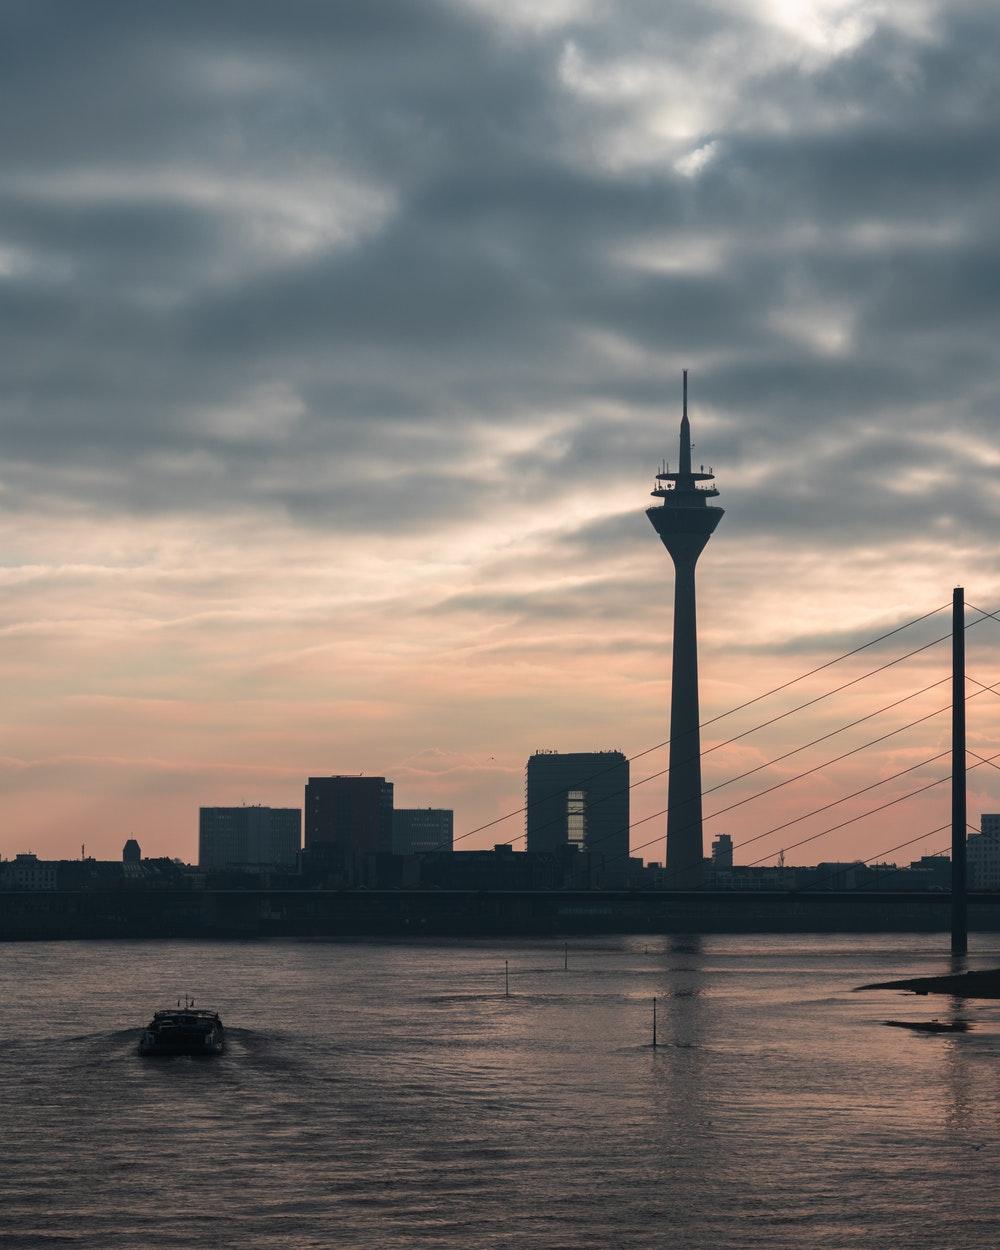 Dusseldorf Germany Picture. Download Free Image